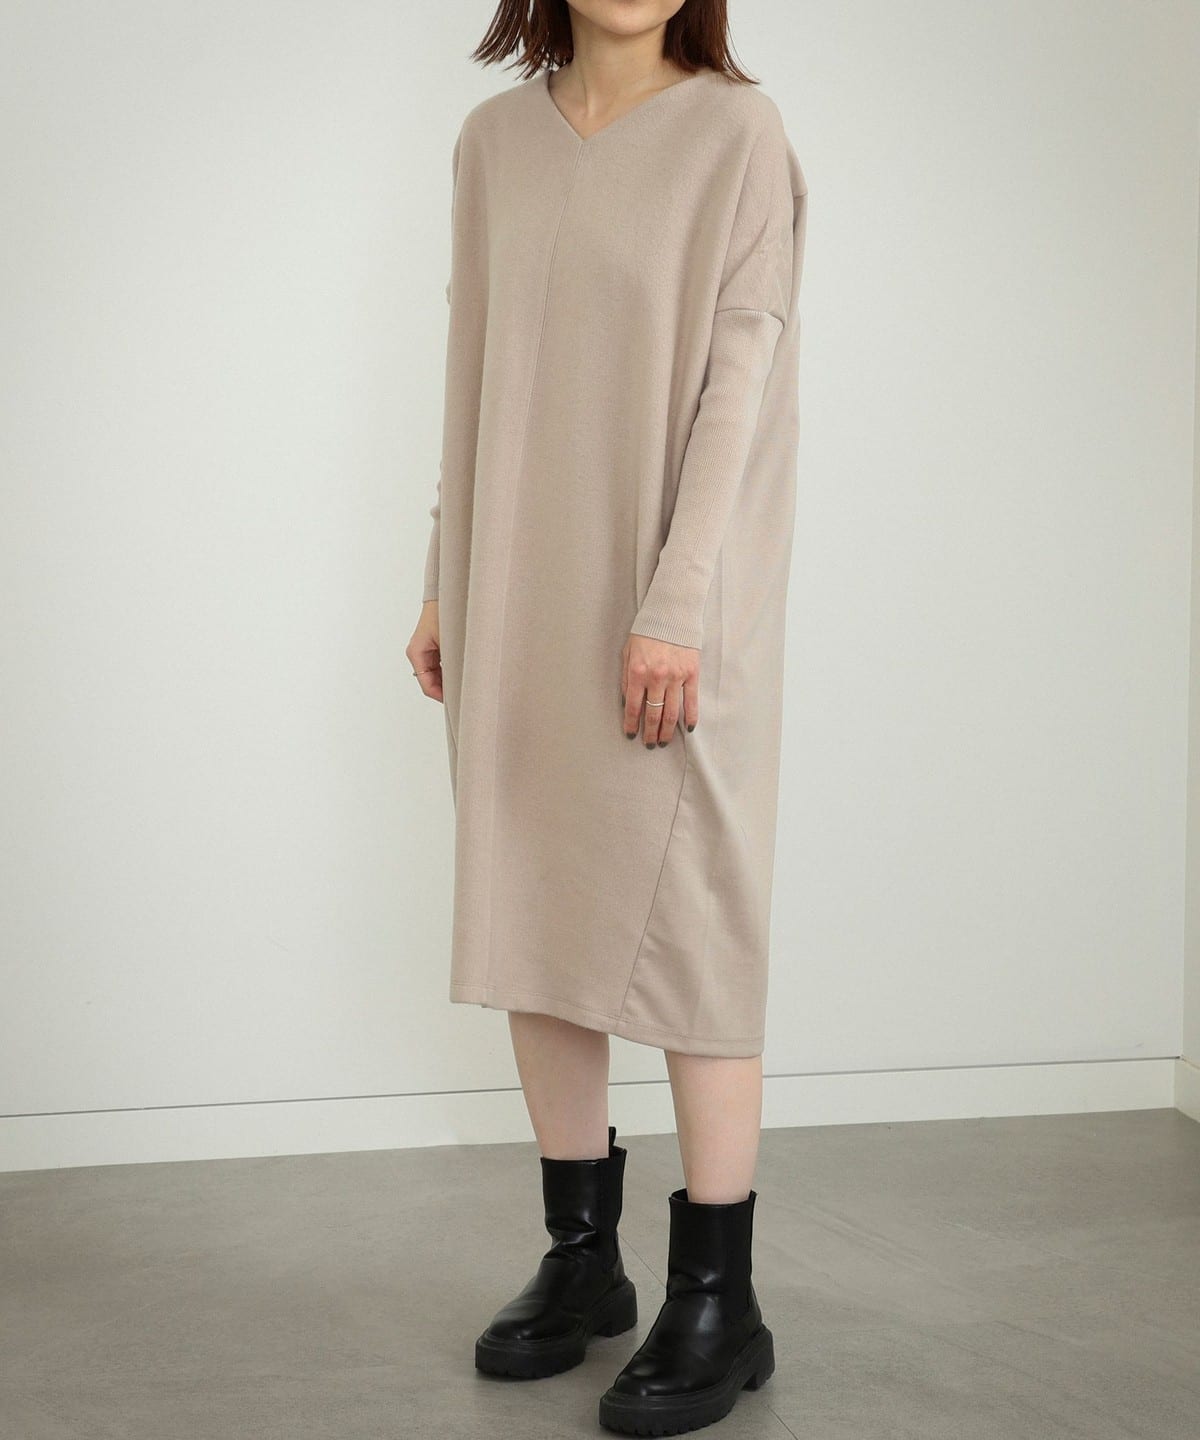 [Outlet] BEAMS HEART / V-neck dress with different materials